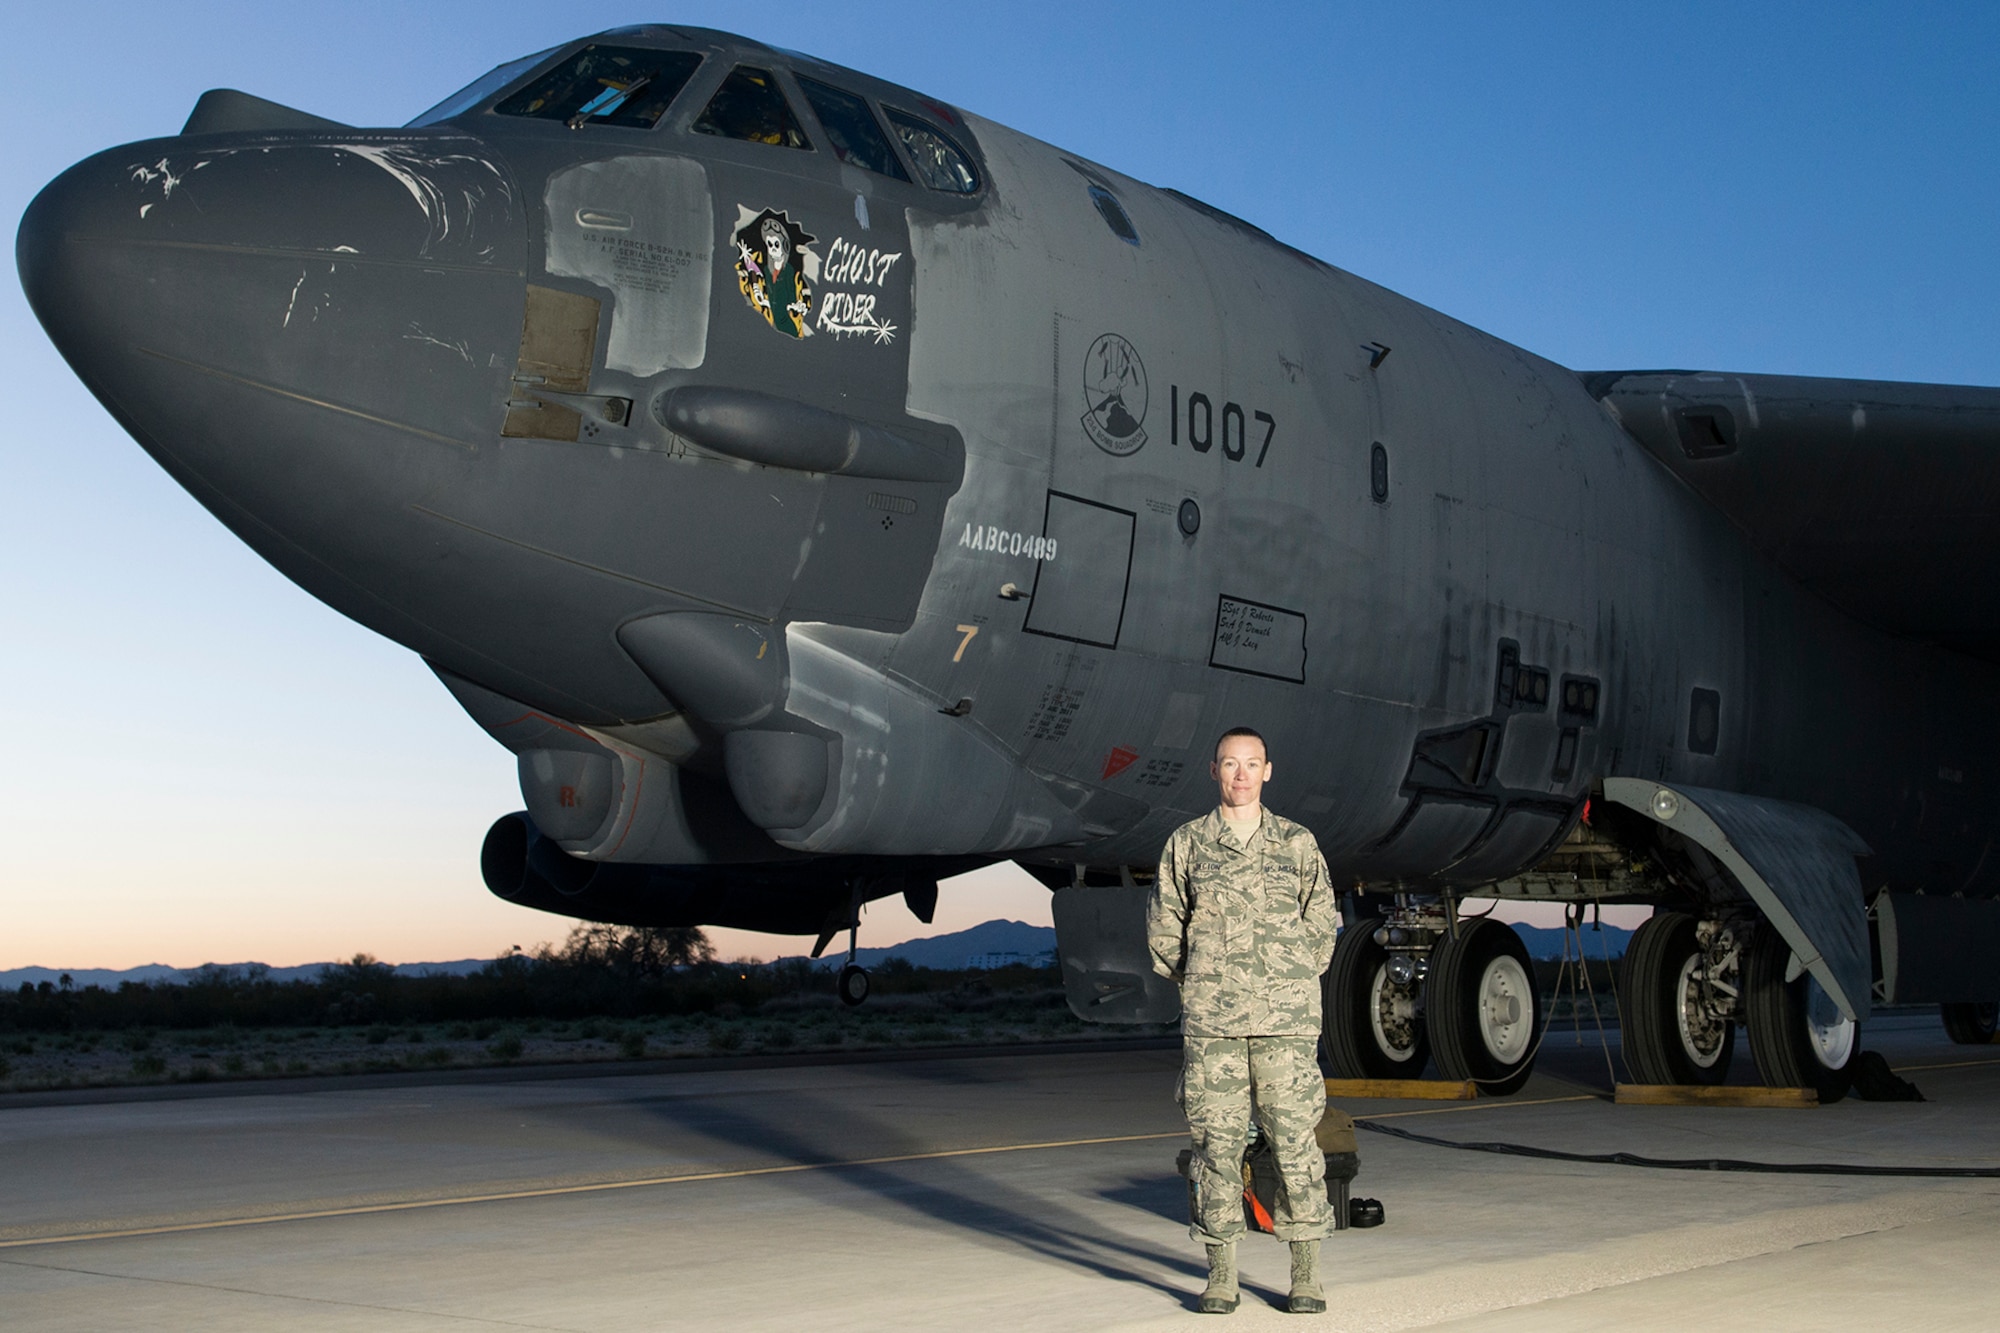 Tech. Sgt. Suann Becton, 507th Maintenance Squadron poses in front of B-52 aircraft number 61-007 which she helped bring back from the Boneyard in both civilian and Air Force Reserve status.  The B-52 dubbed the Ghost Rider flew from Davis-Monthan Air Force Base, Arizona back to Barksdale Air Force Base, Louisiana after the maintenance team brought it back to life. (Courtesy Photo) 